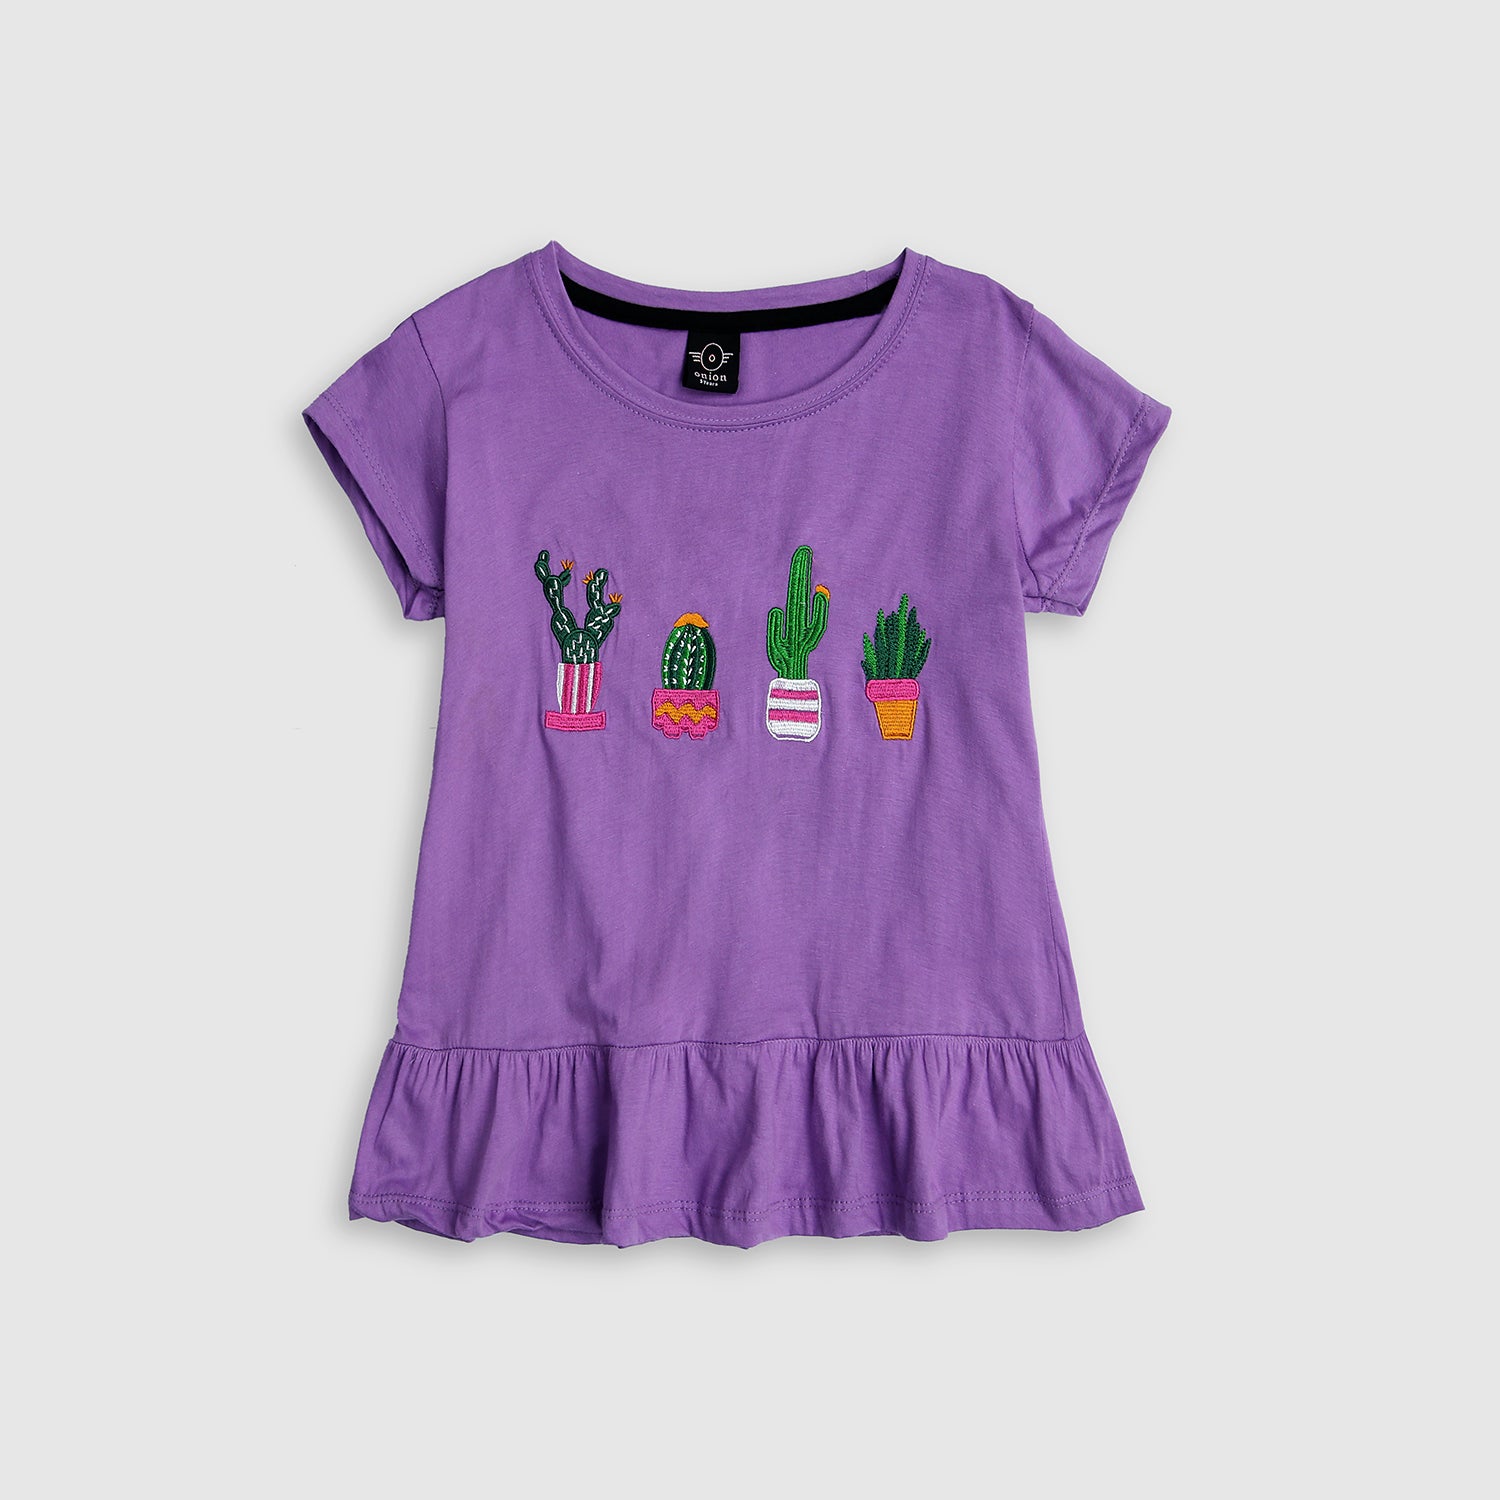 Girls Pure Cotton "Cactus" Graphic T-shirt Frock